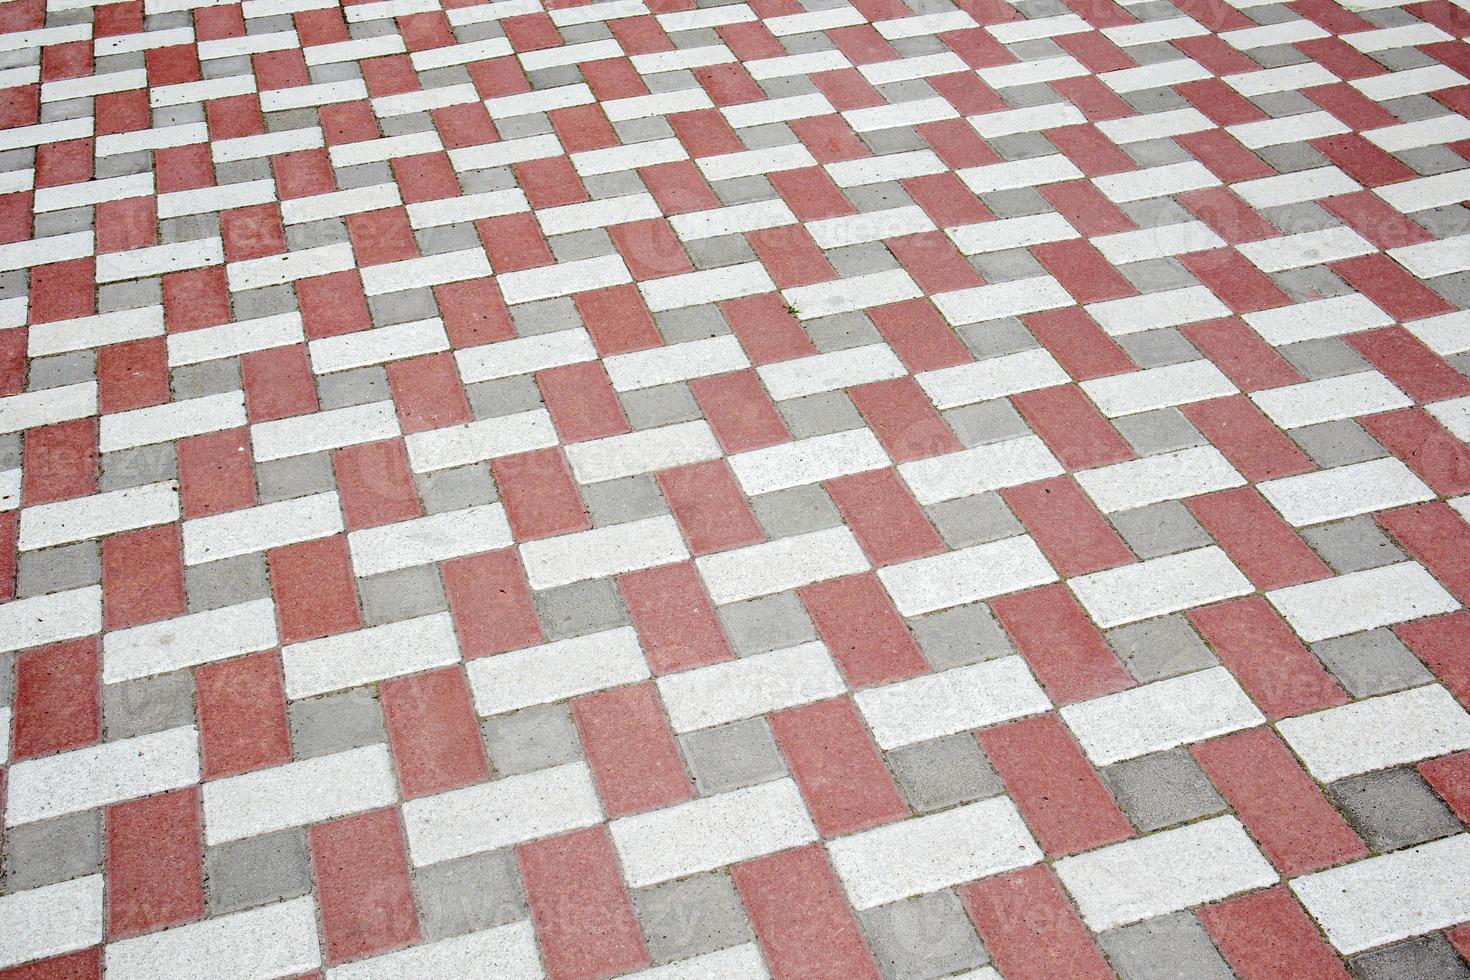 Concrete or paved newly laid gray and red paving slabs or stones for floors or walkways. Concrete paving slabs in the backyard or road paving. Garden brick path in the courtyard on a sandy foundation. photo